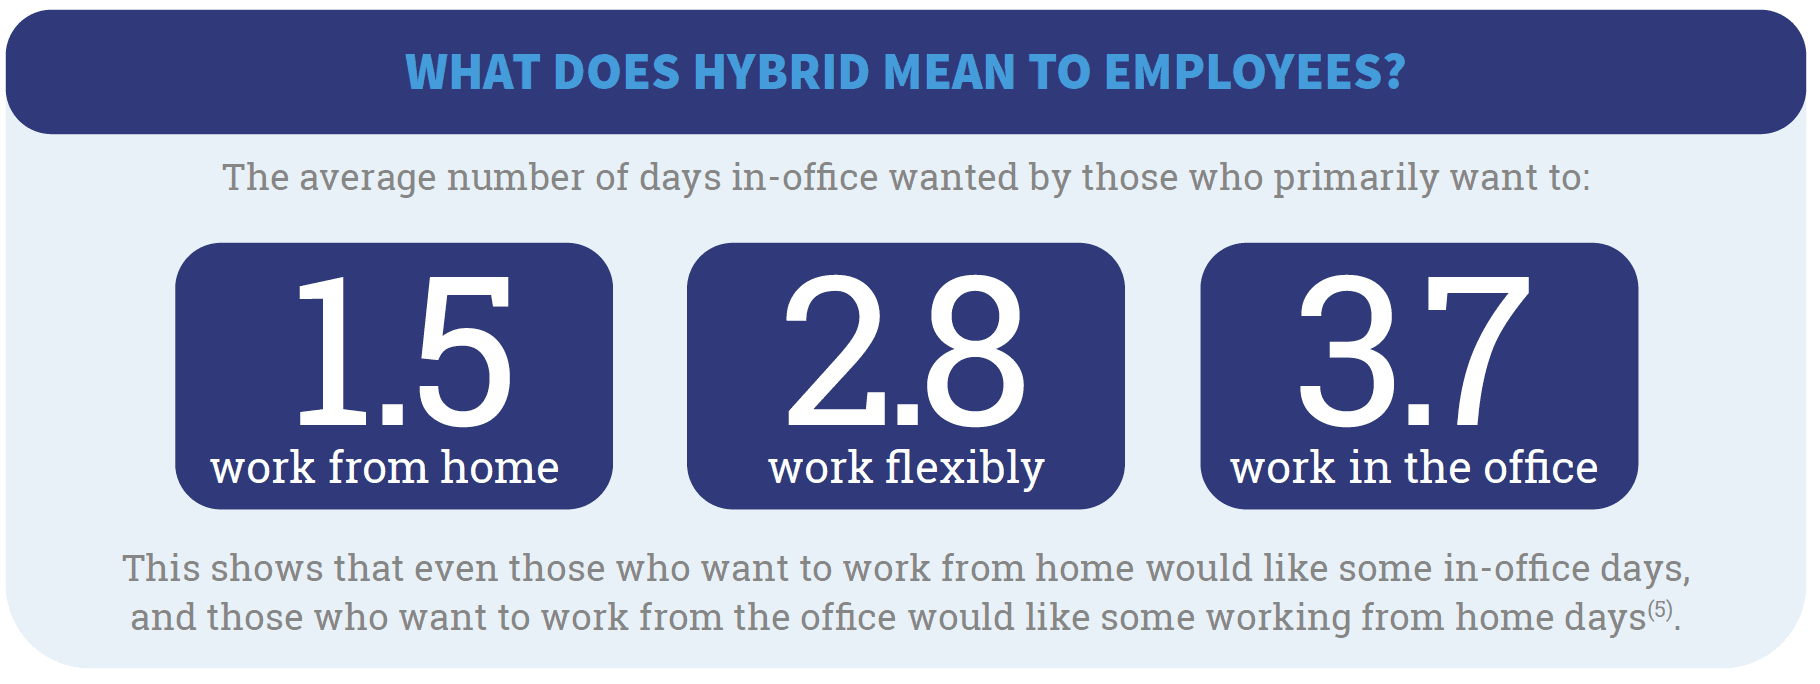 Employee Engagement: What does Hybrid mean to employees?